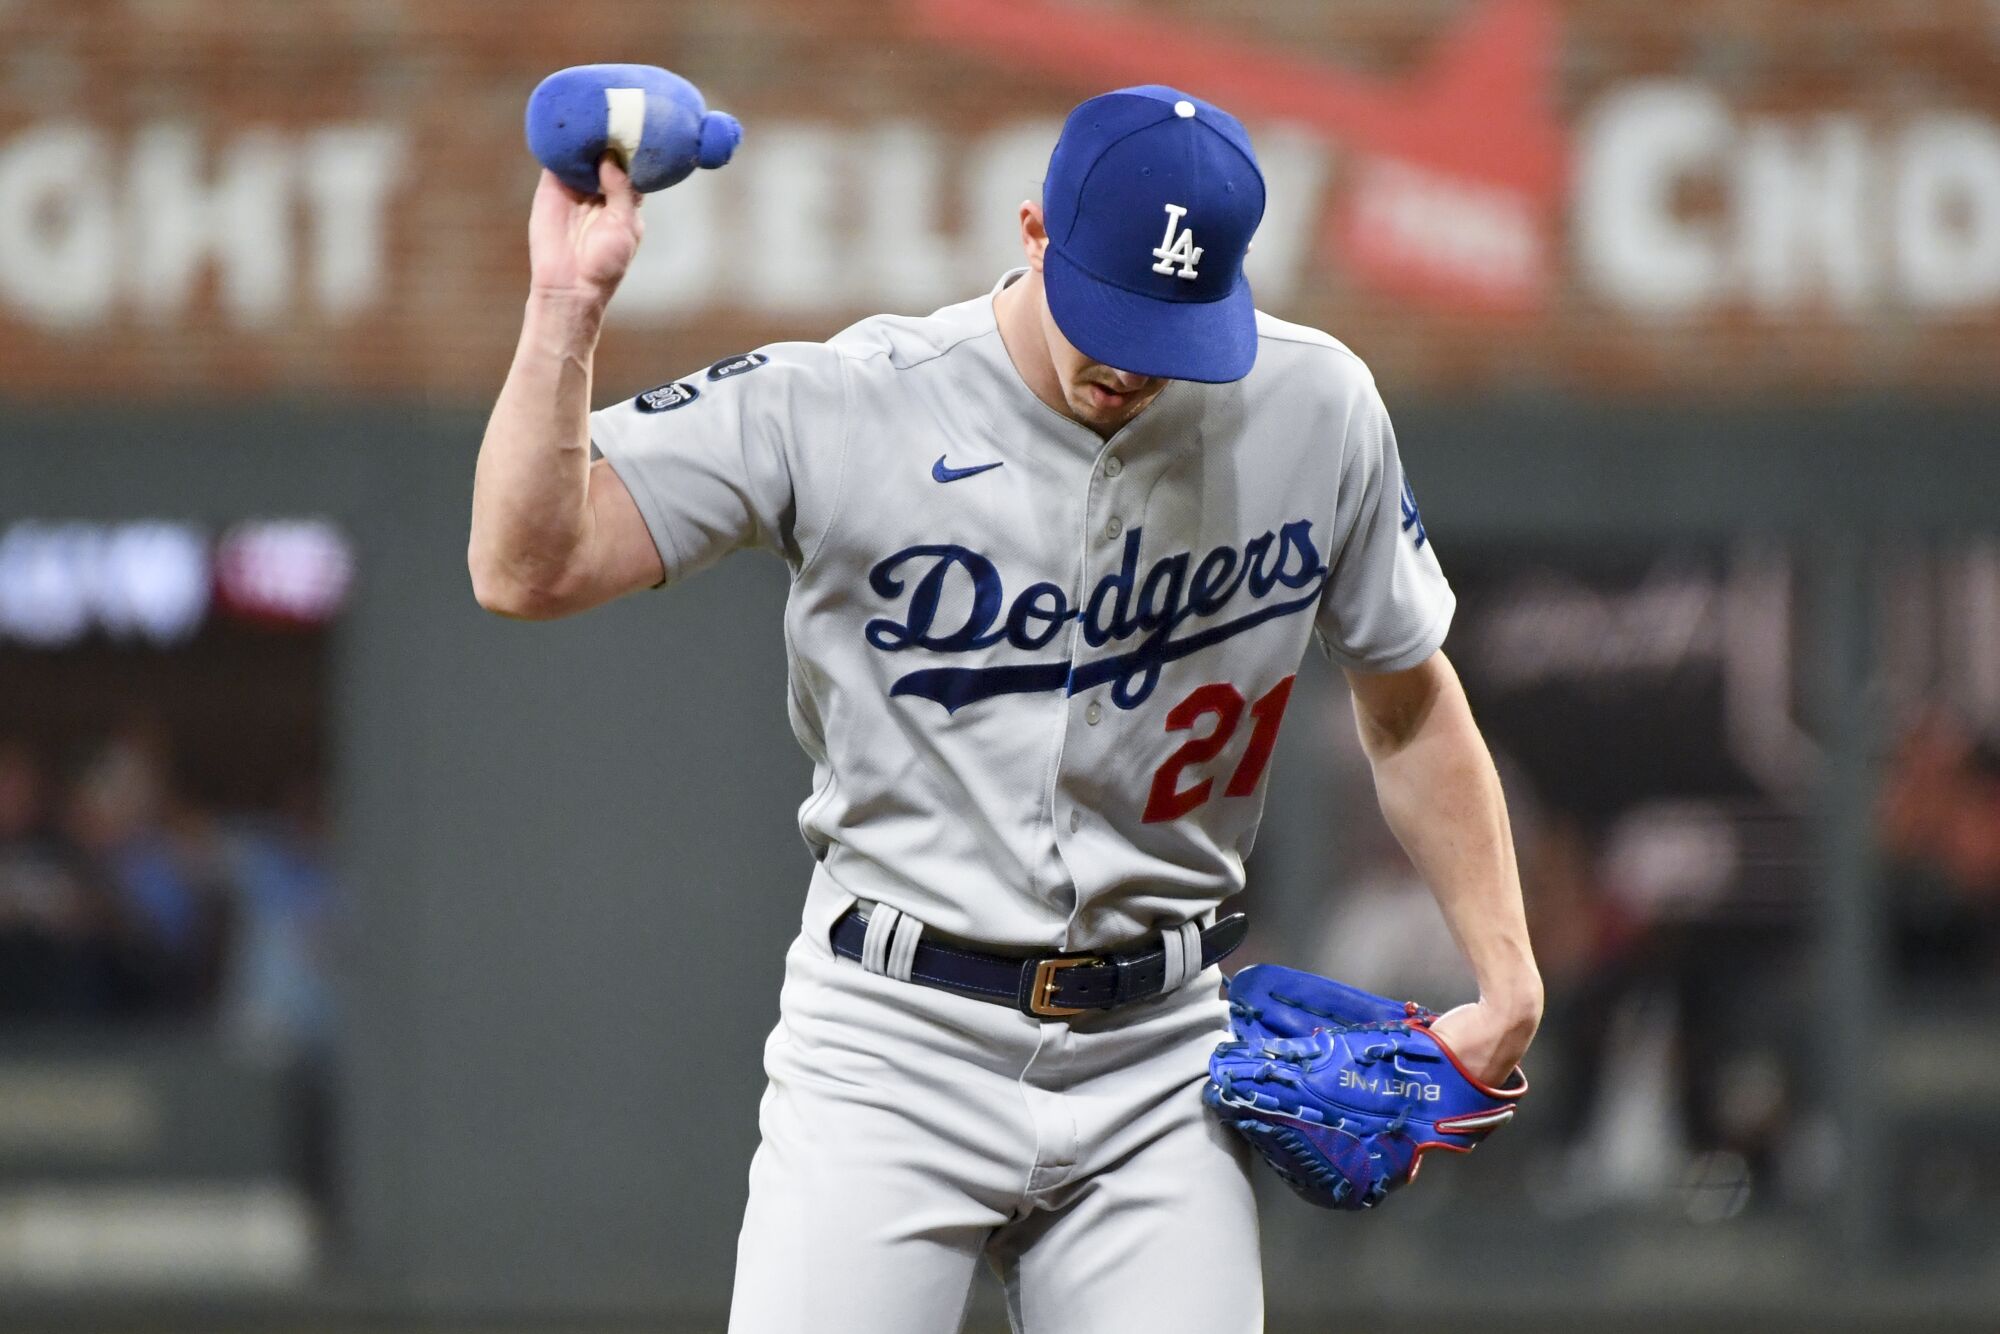 Dodgers starting pitcher Walker Buehler reacts after giving up an RBI double to Braves' Austin Riley.